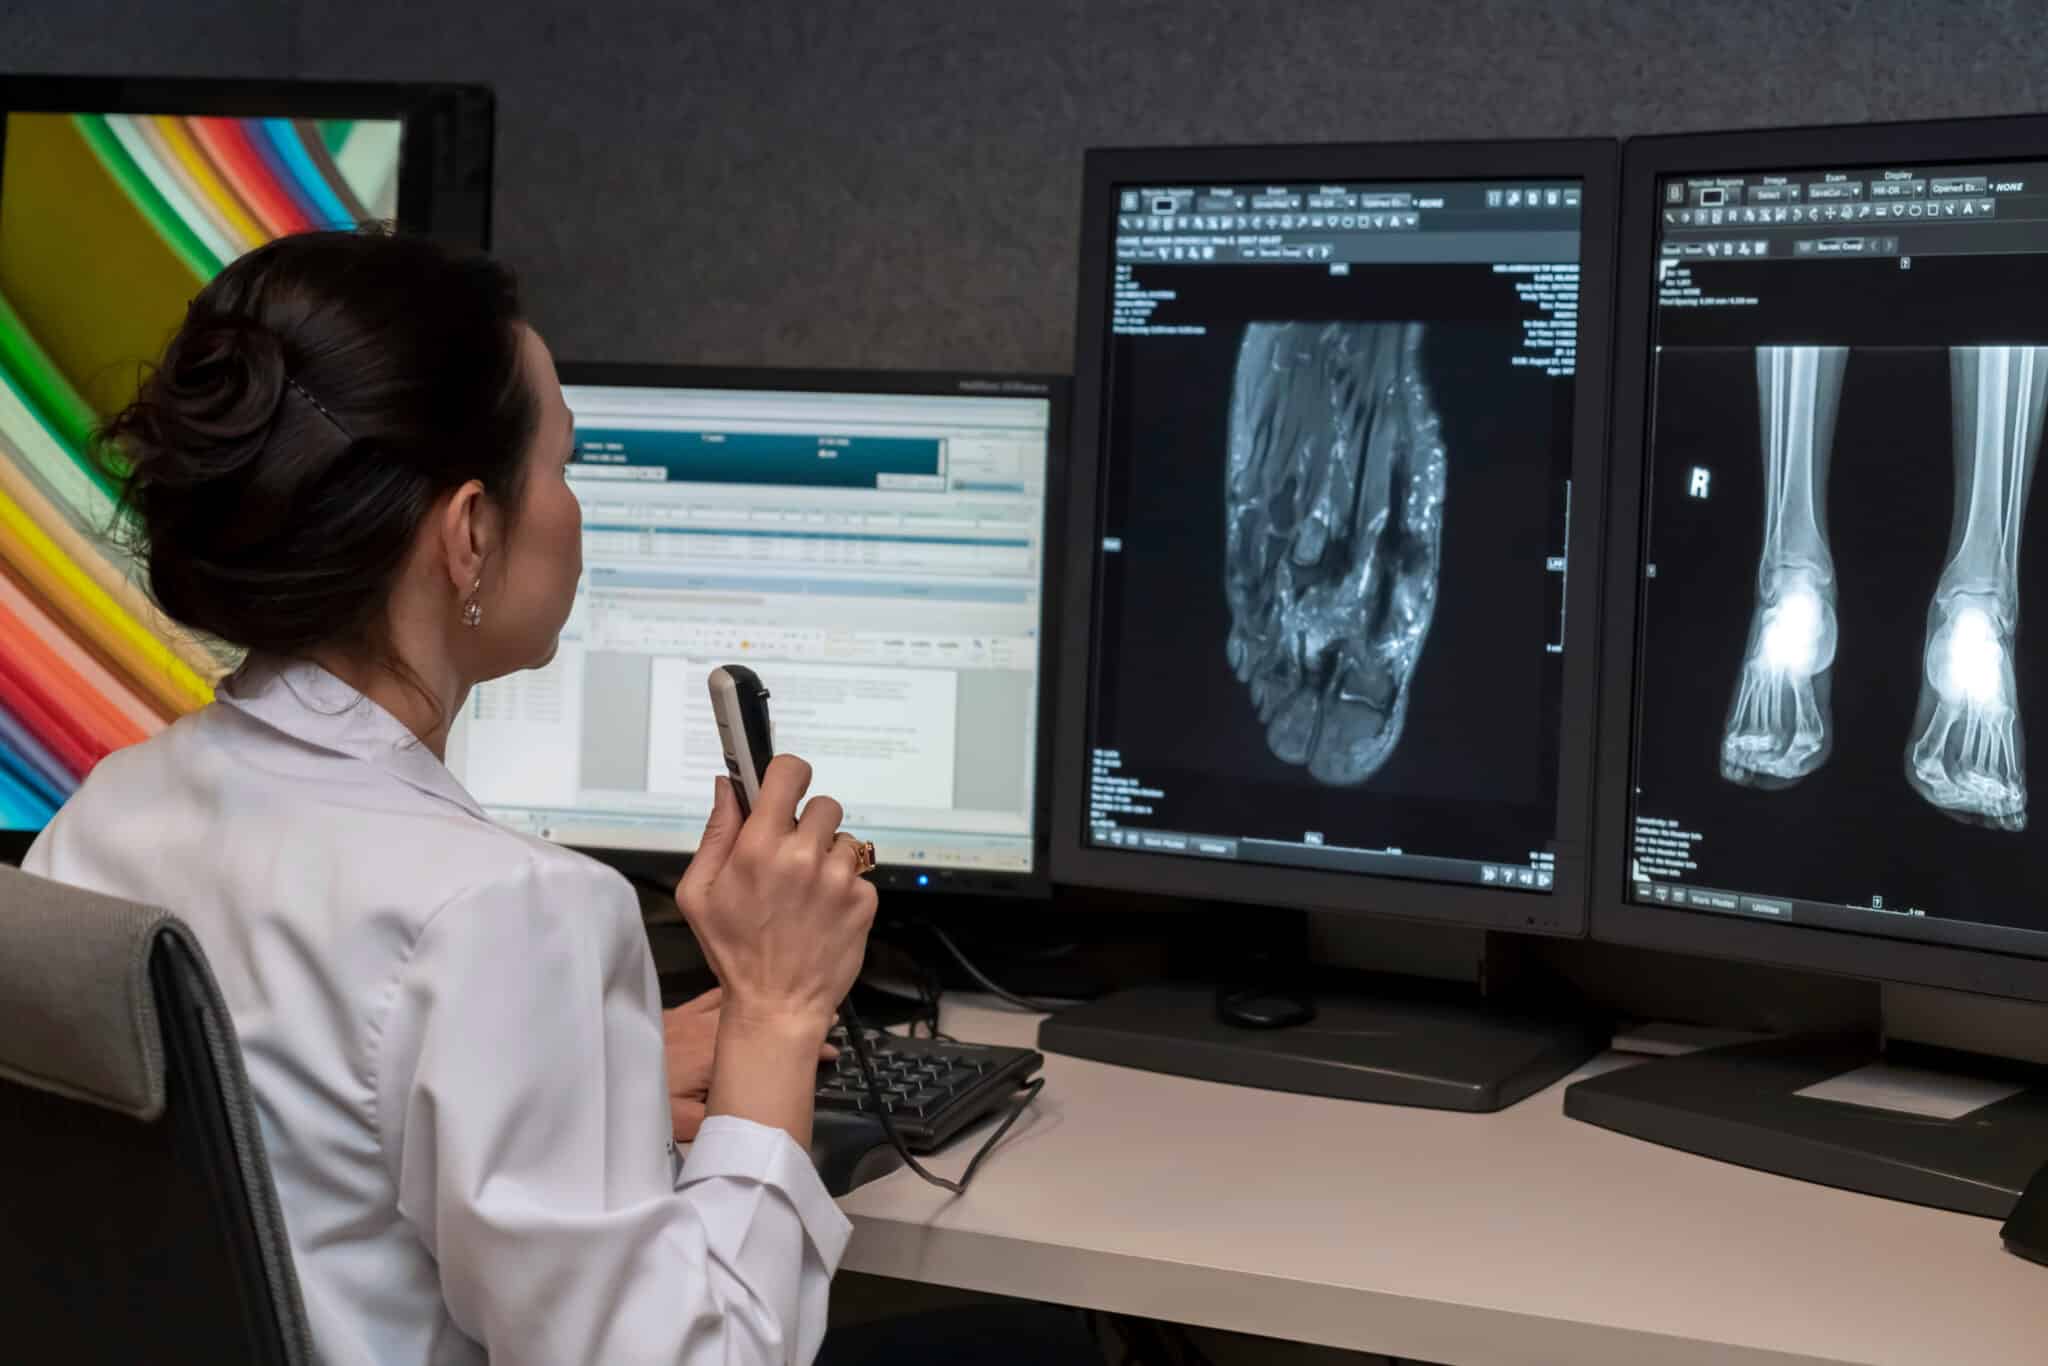 Radiologist at workstation, using speech recognition software to dictate diagnostic notes.